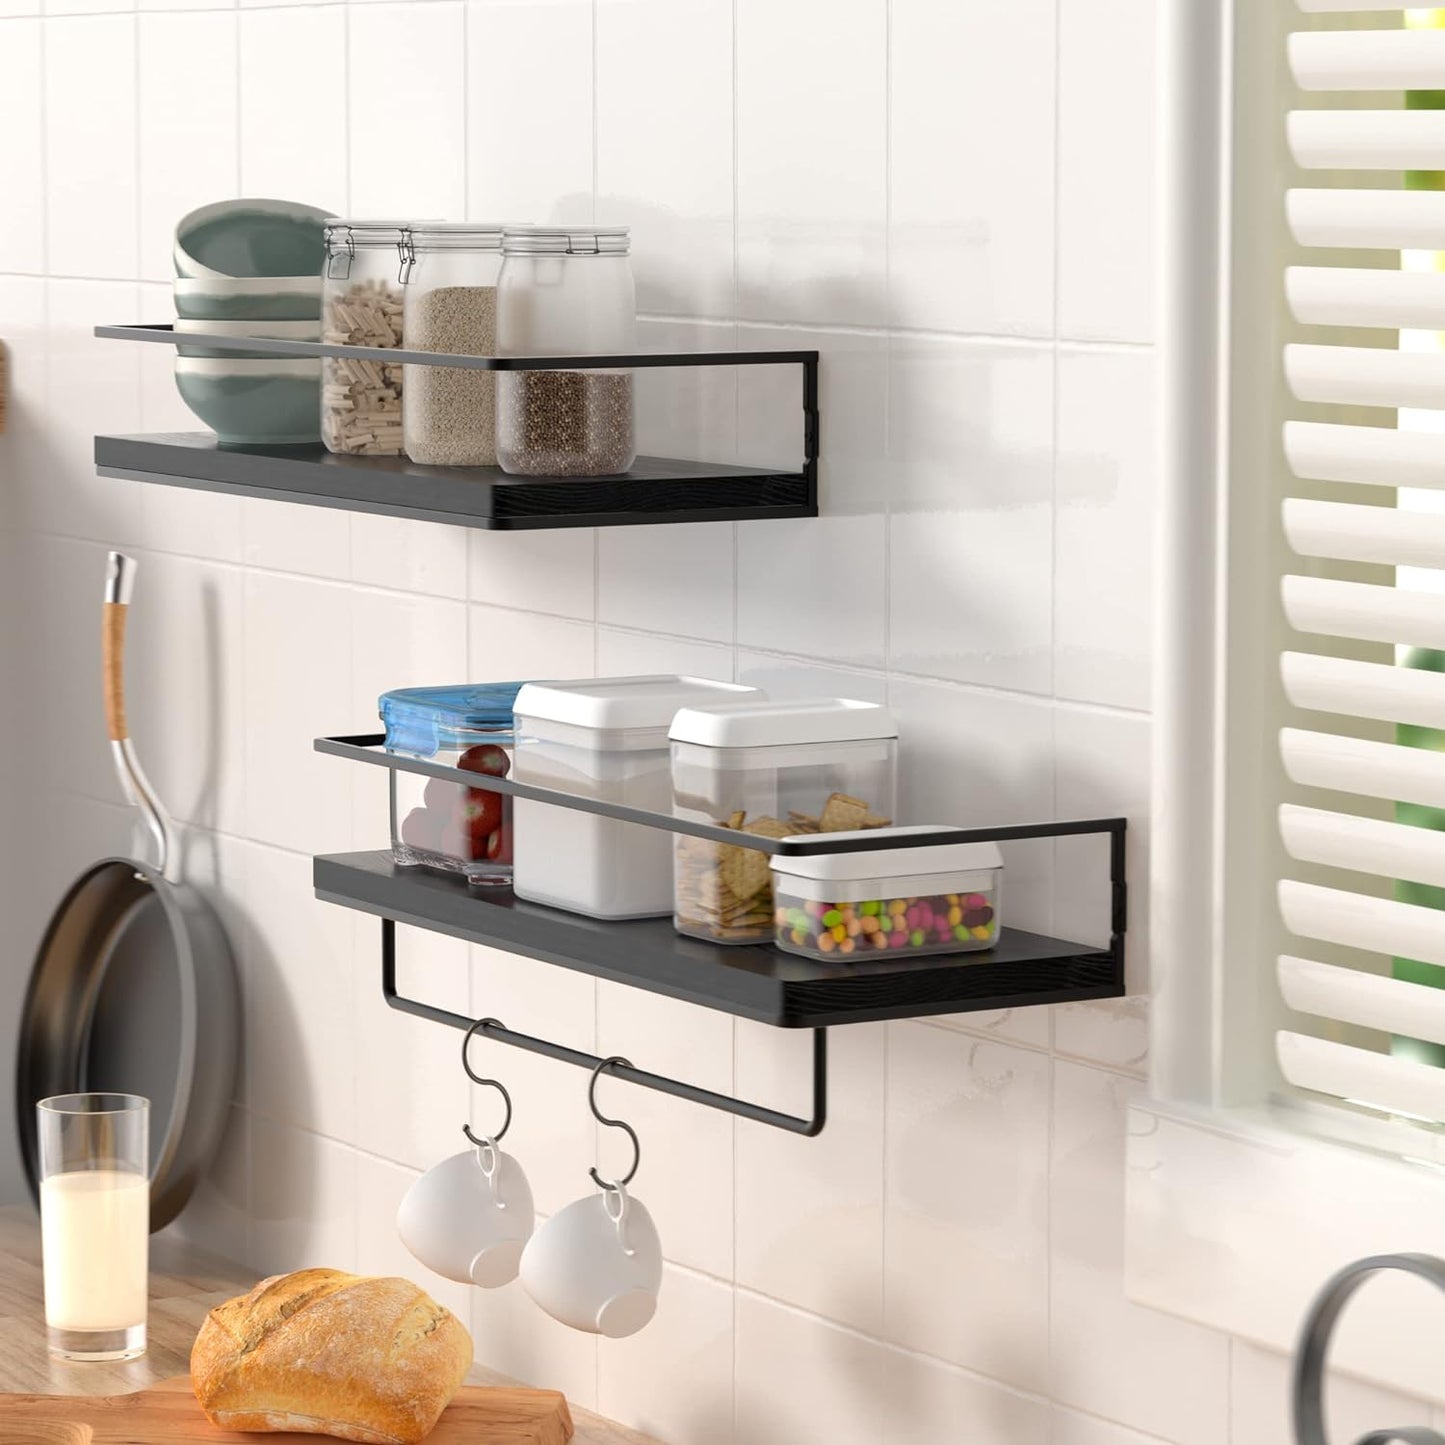 New Floating Shelves for Wall Set of 2, Wall Mounted Storage Shelves with Black Metal Frame and Towel Rack for Bathroom, Bedroom, Living Room, Kitchen, Office (Black)